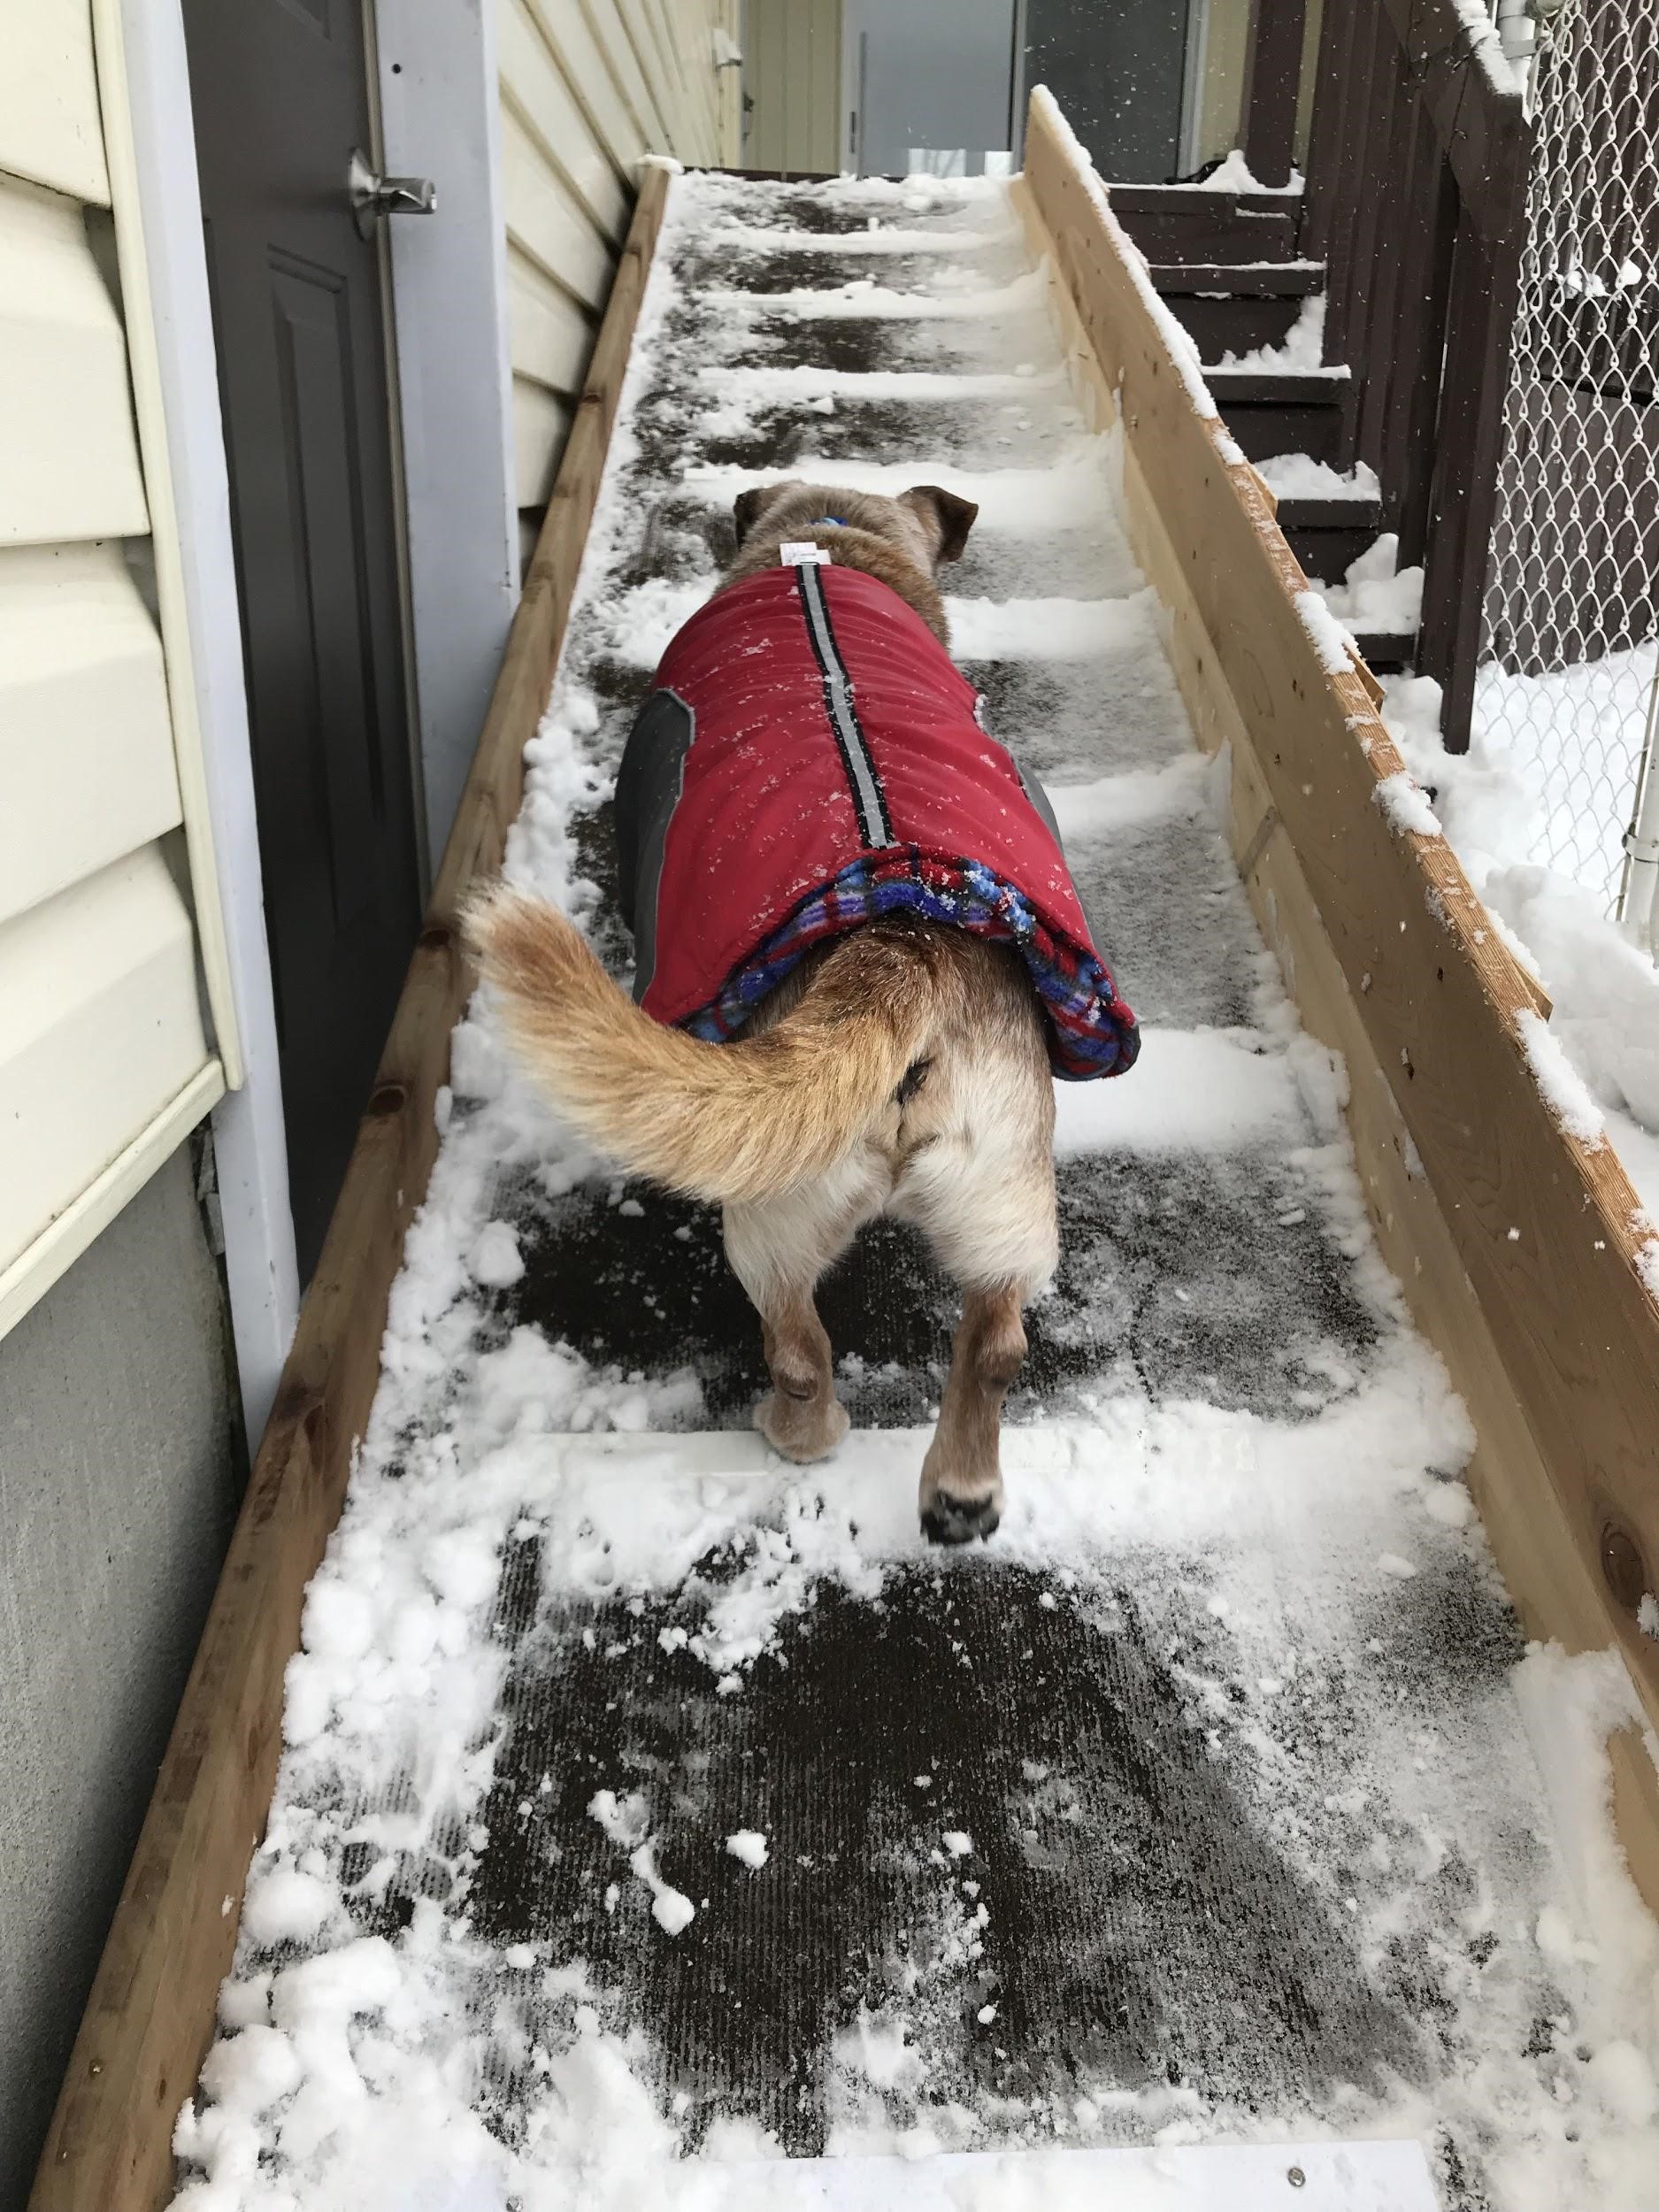 Back view of a dog wearing a jacket and walking up snowy stairs